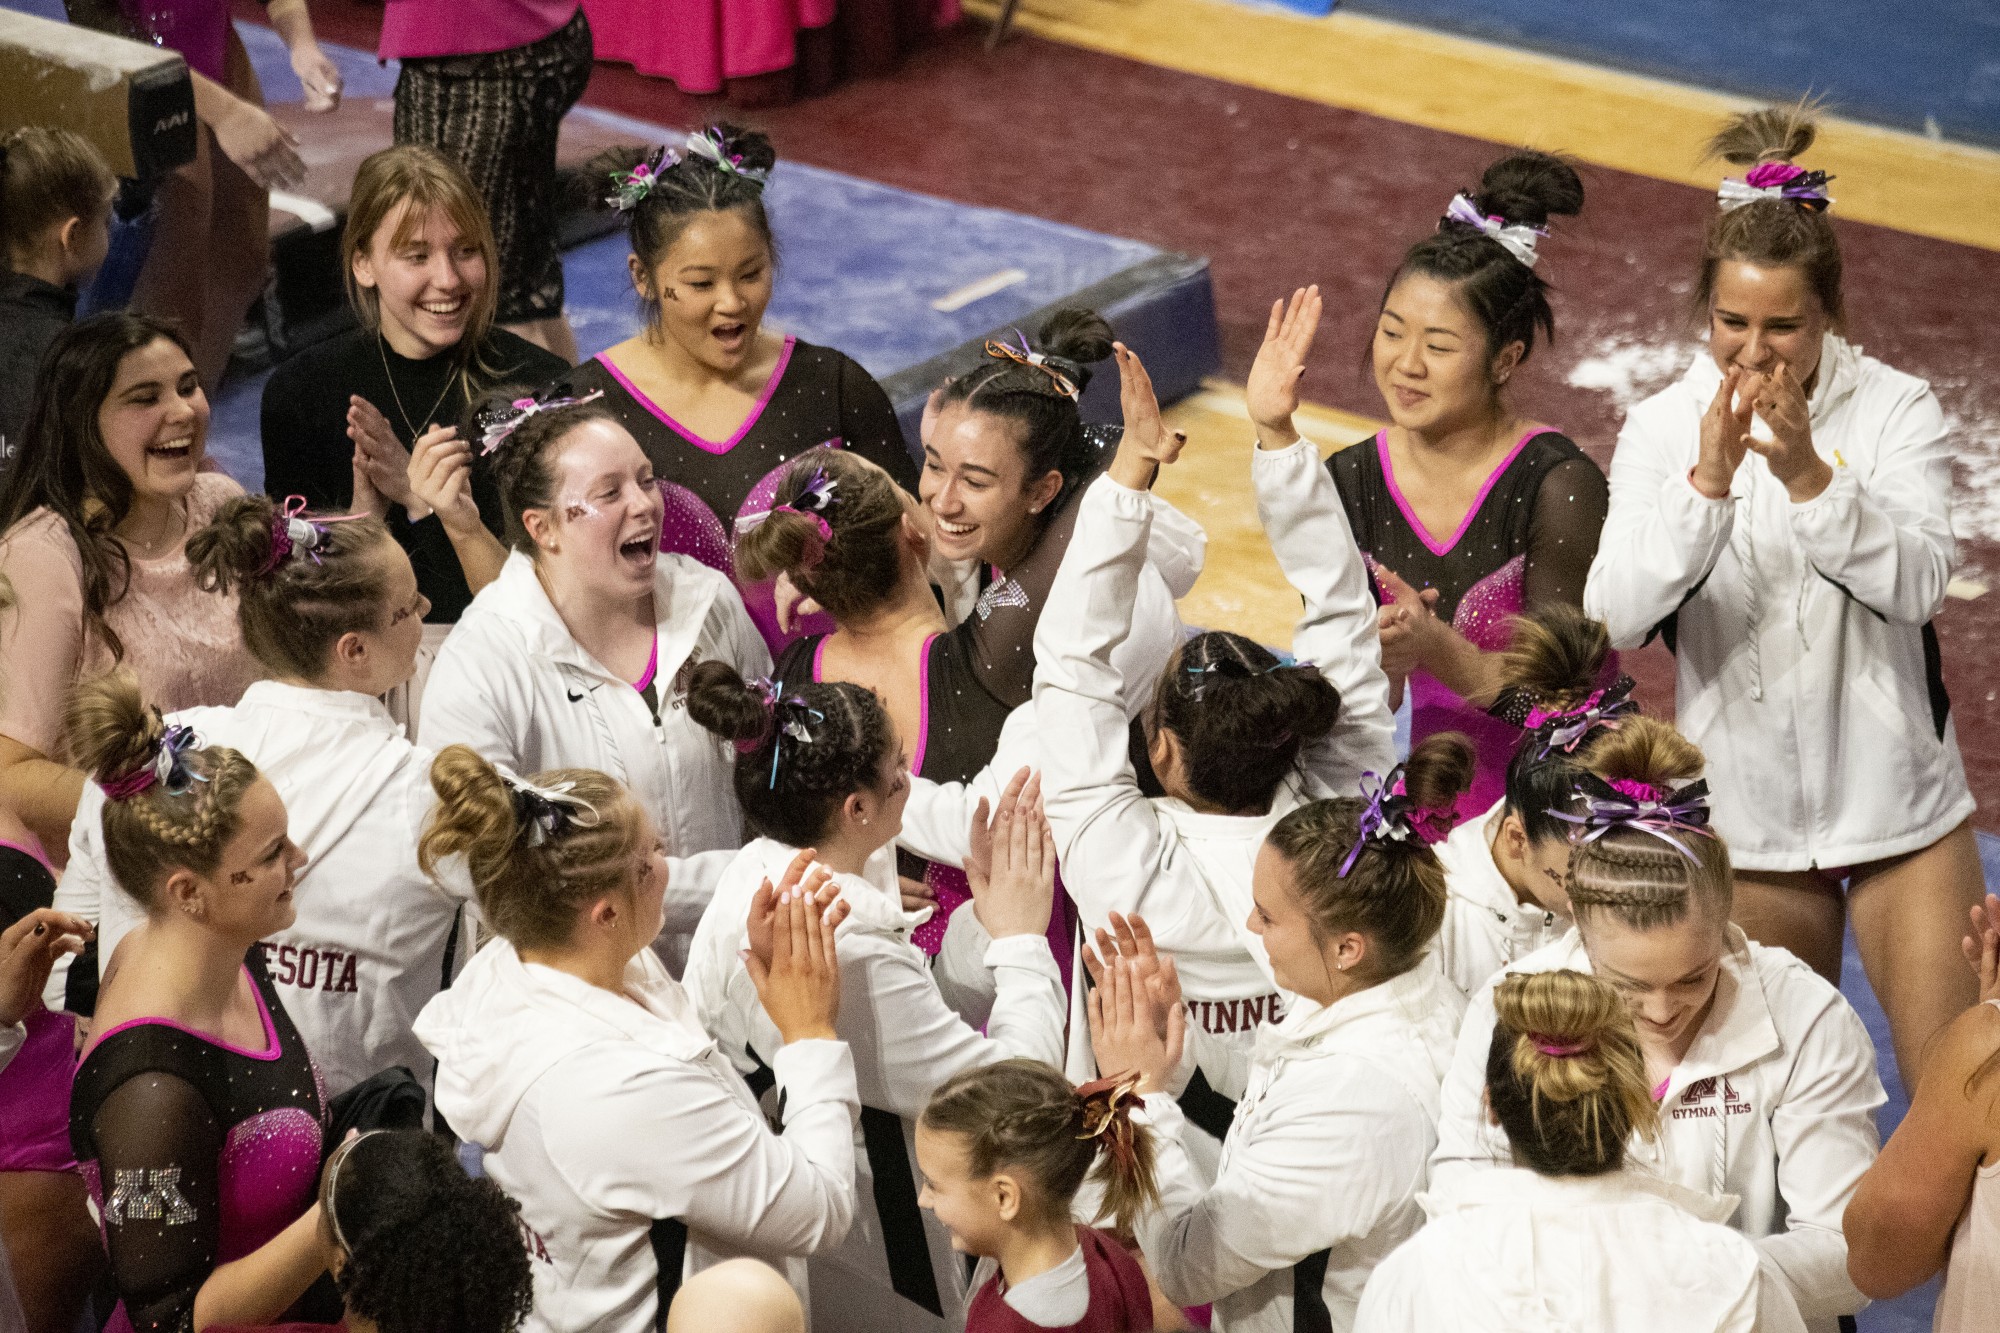 The No. 7 University of Minnesota downed No. 17 Illinois in their home opener. Gophers won it with a score of 196.300 to Illinois 195.225 at on Saturday, Jan. 25. 